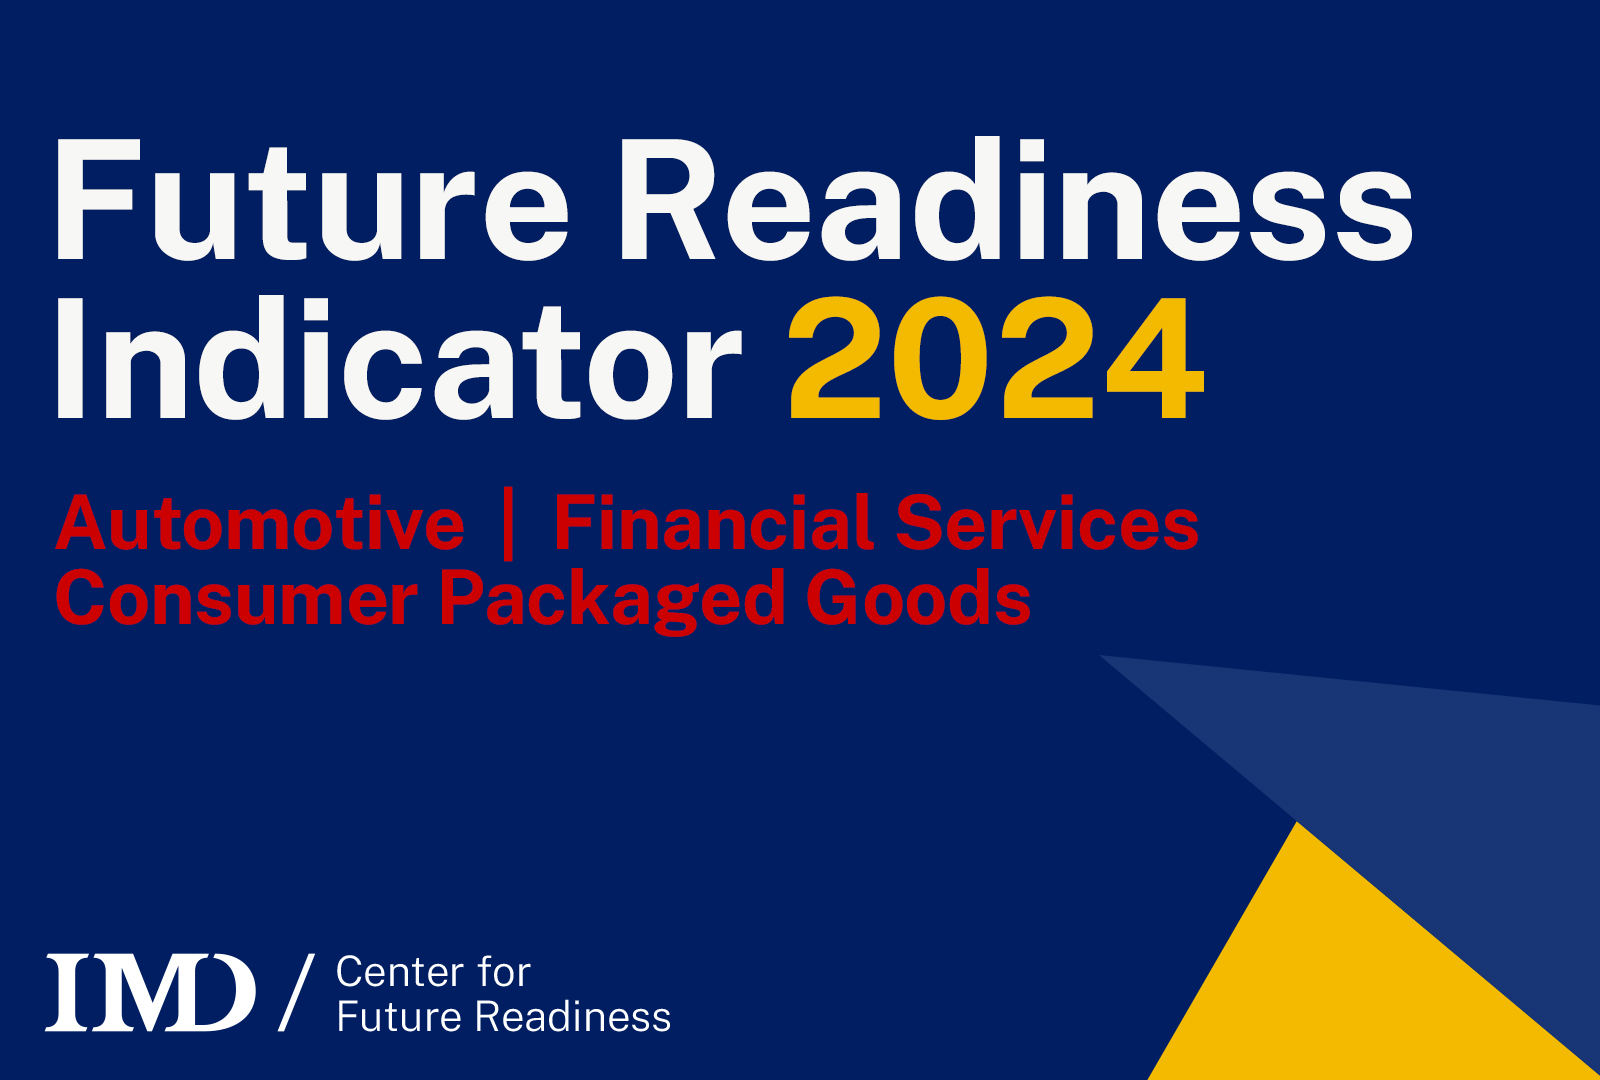 The 2024 IMD Future Readiness Indicator shows how leaders are reading themselves for a world of dramatic transformation